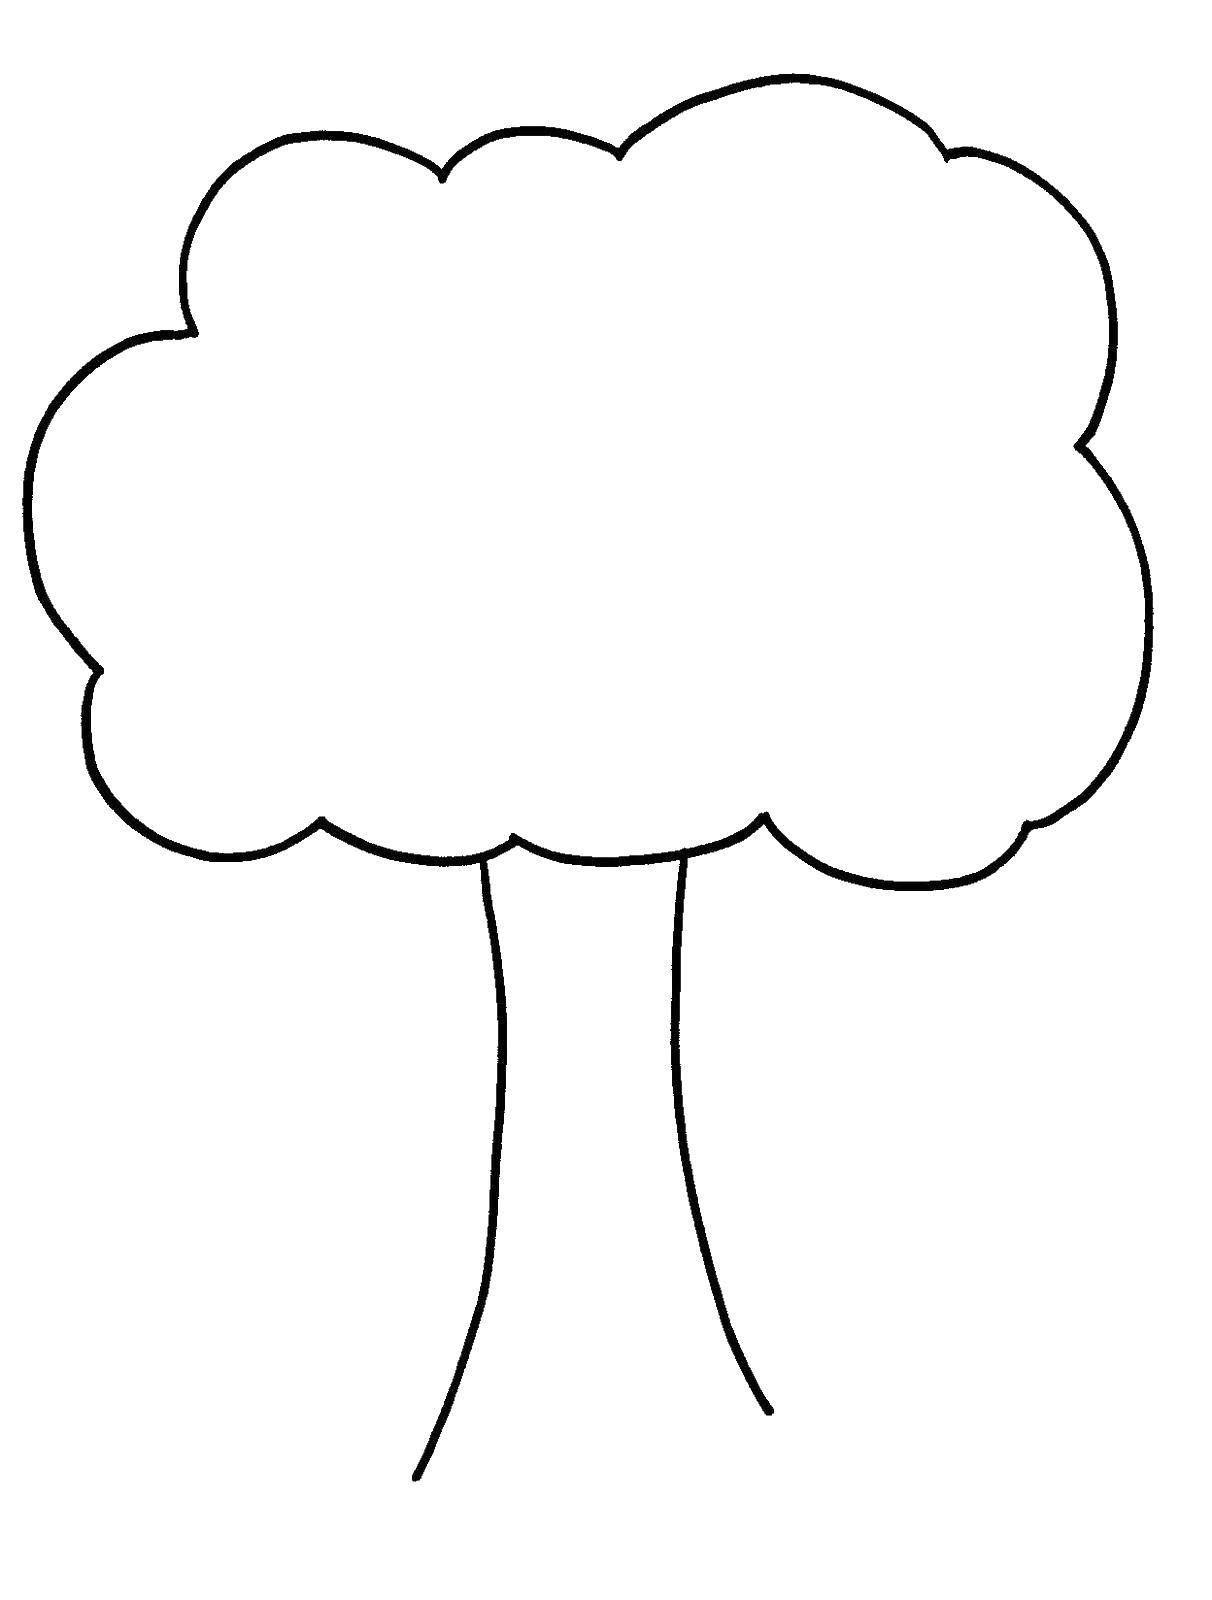 Coloring Tree. Category Family tree. Tags:  tree, crown, leaves.